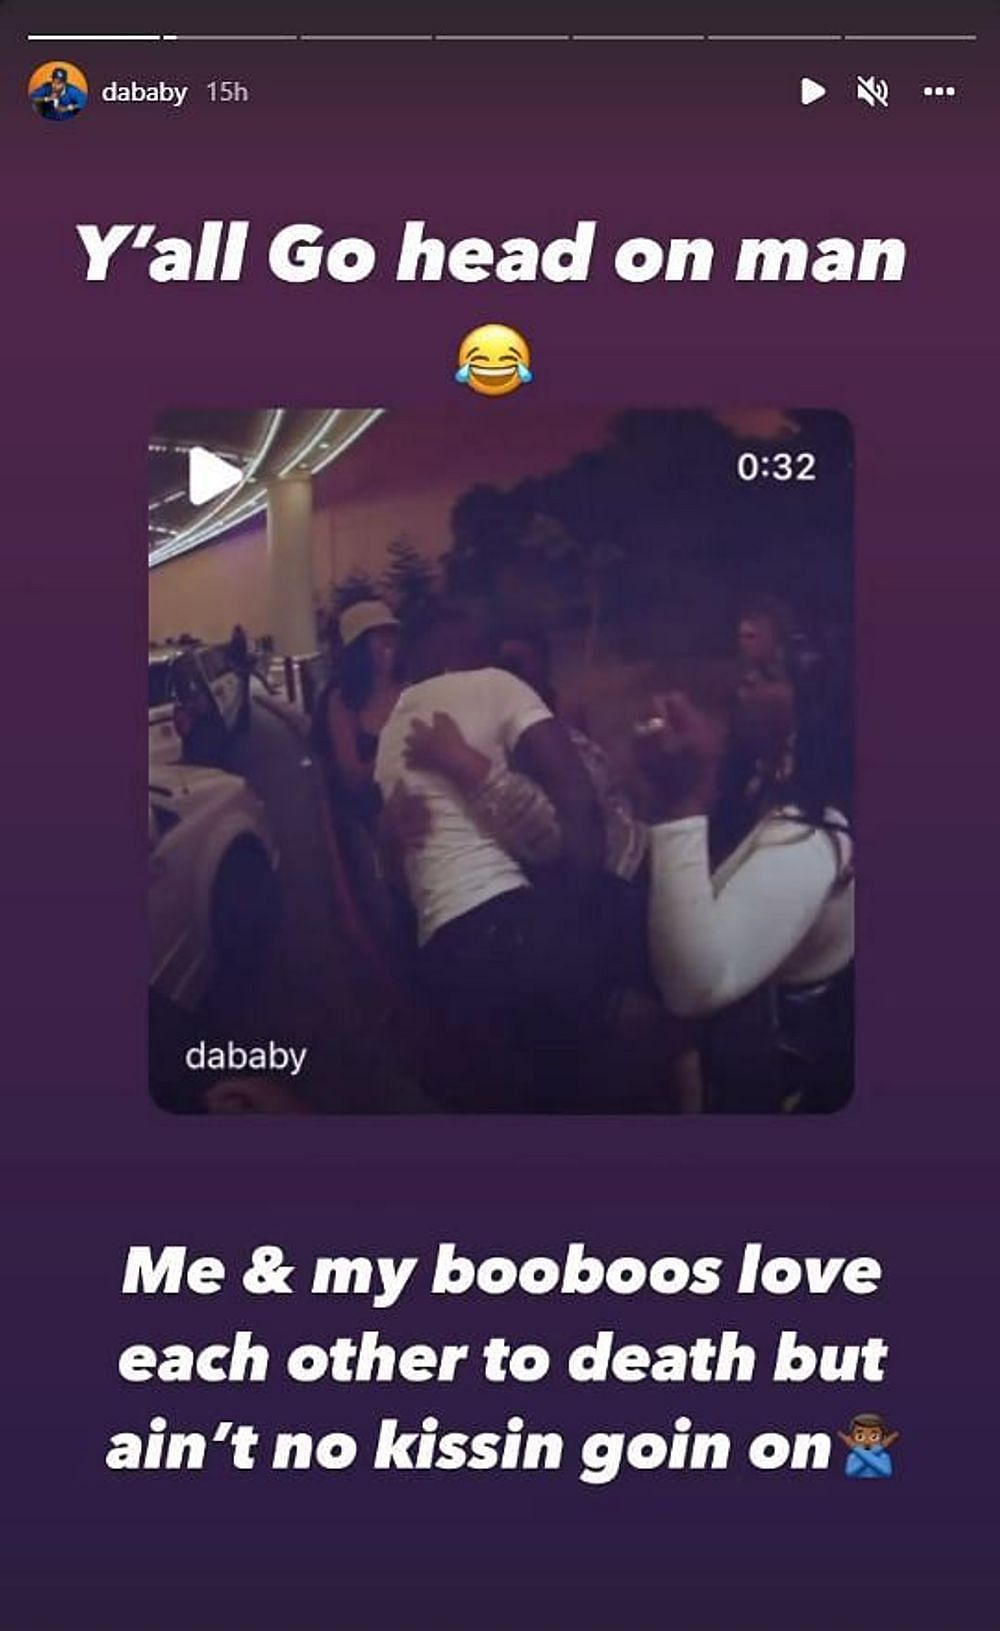 Rapper responds to kissing fan without consent (Image via dababy/Instagram)